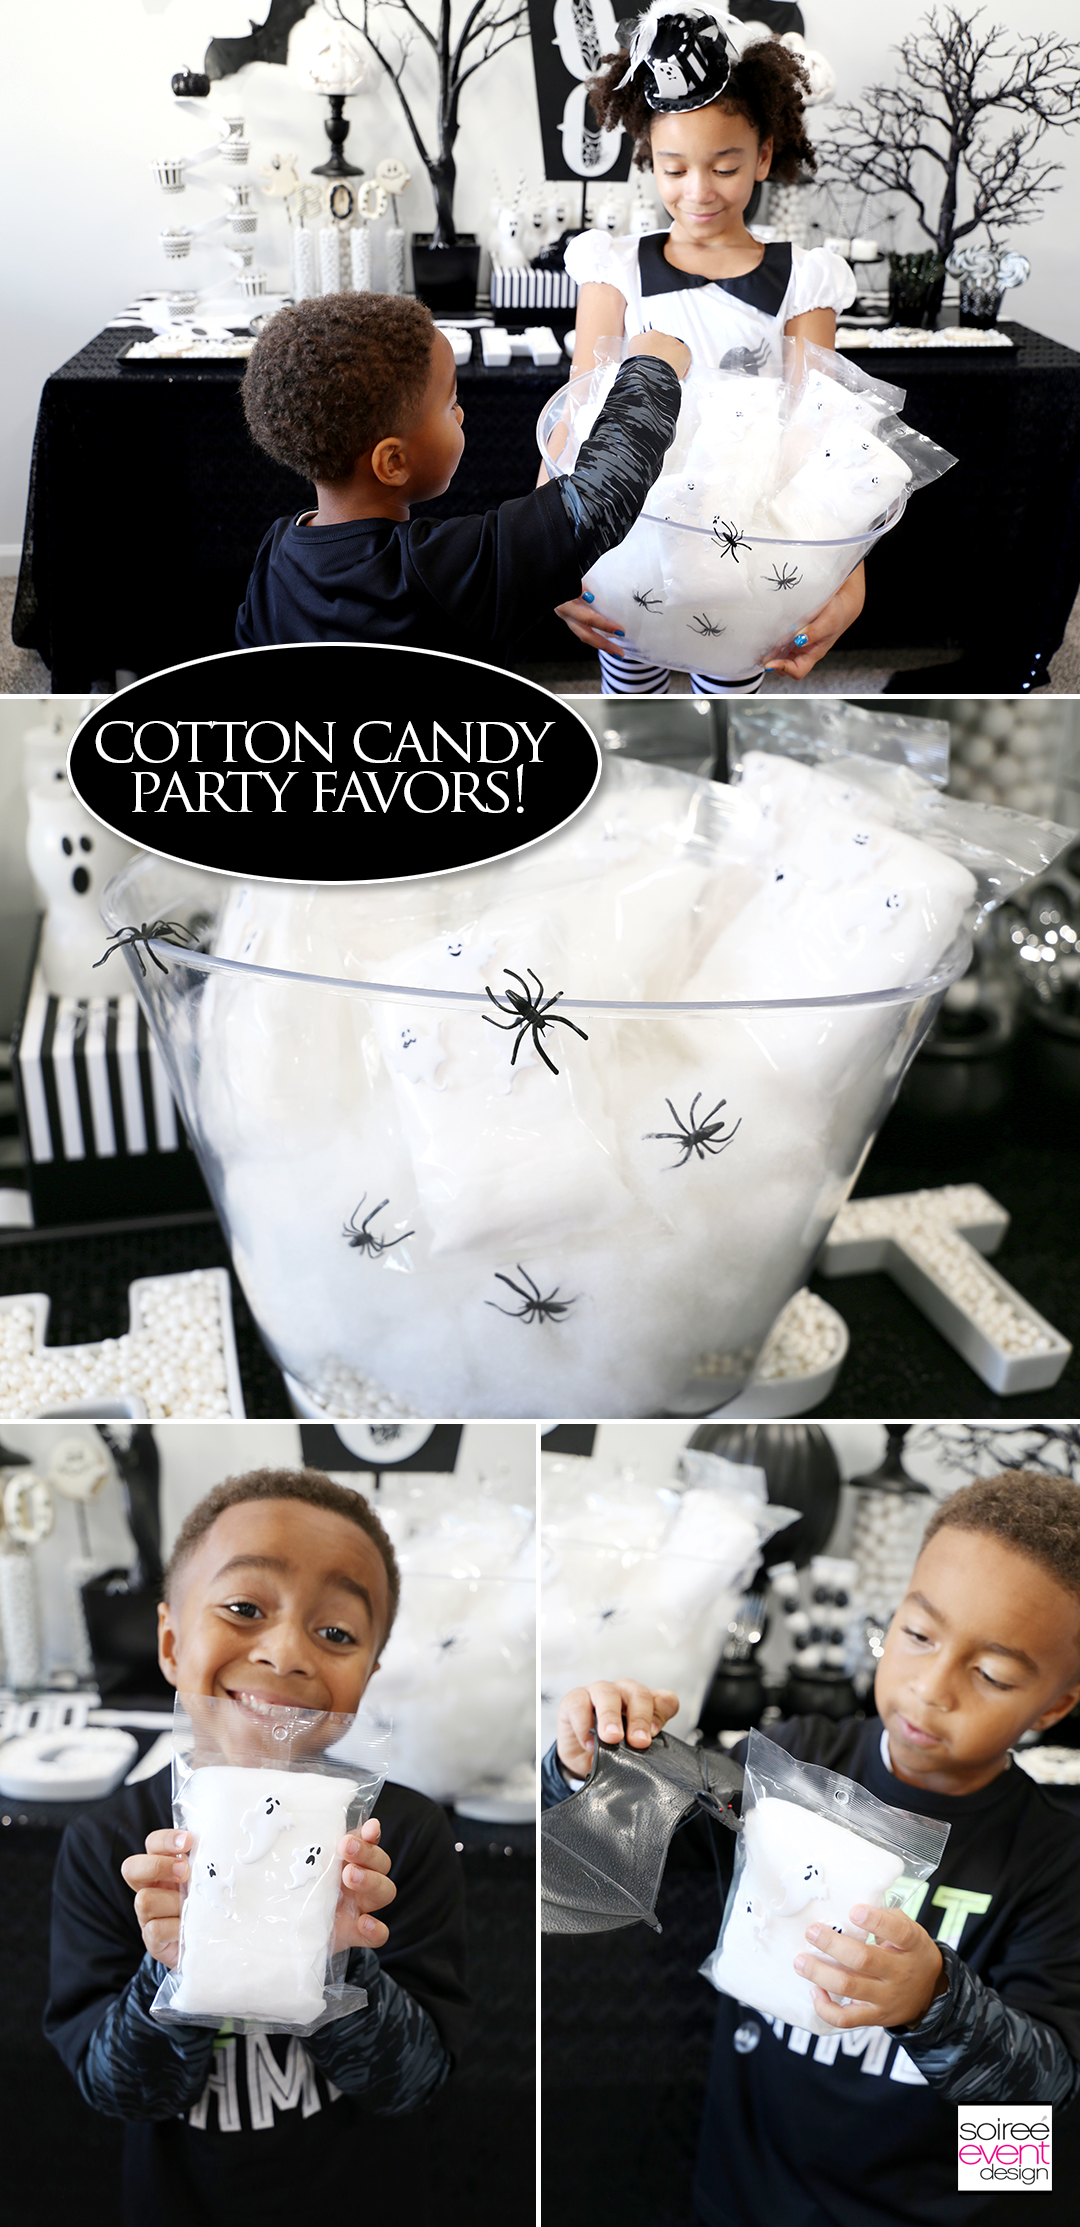 Halloween Desserts - Cotton Candy party favors